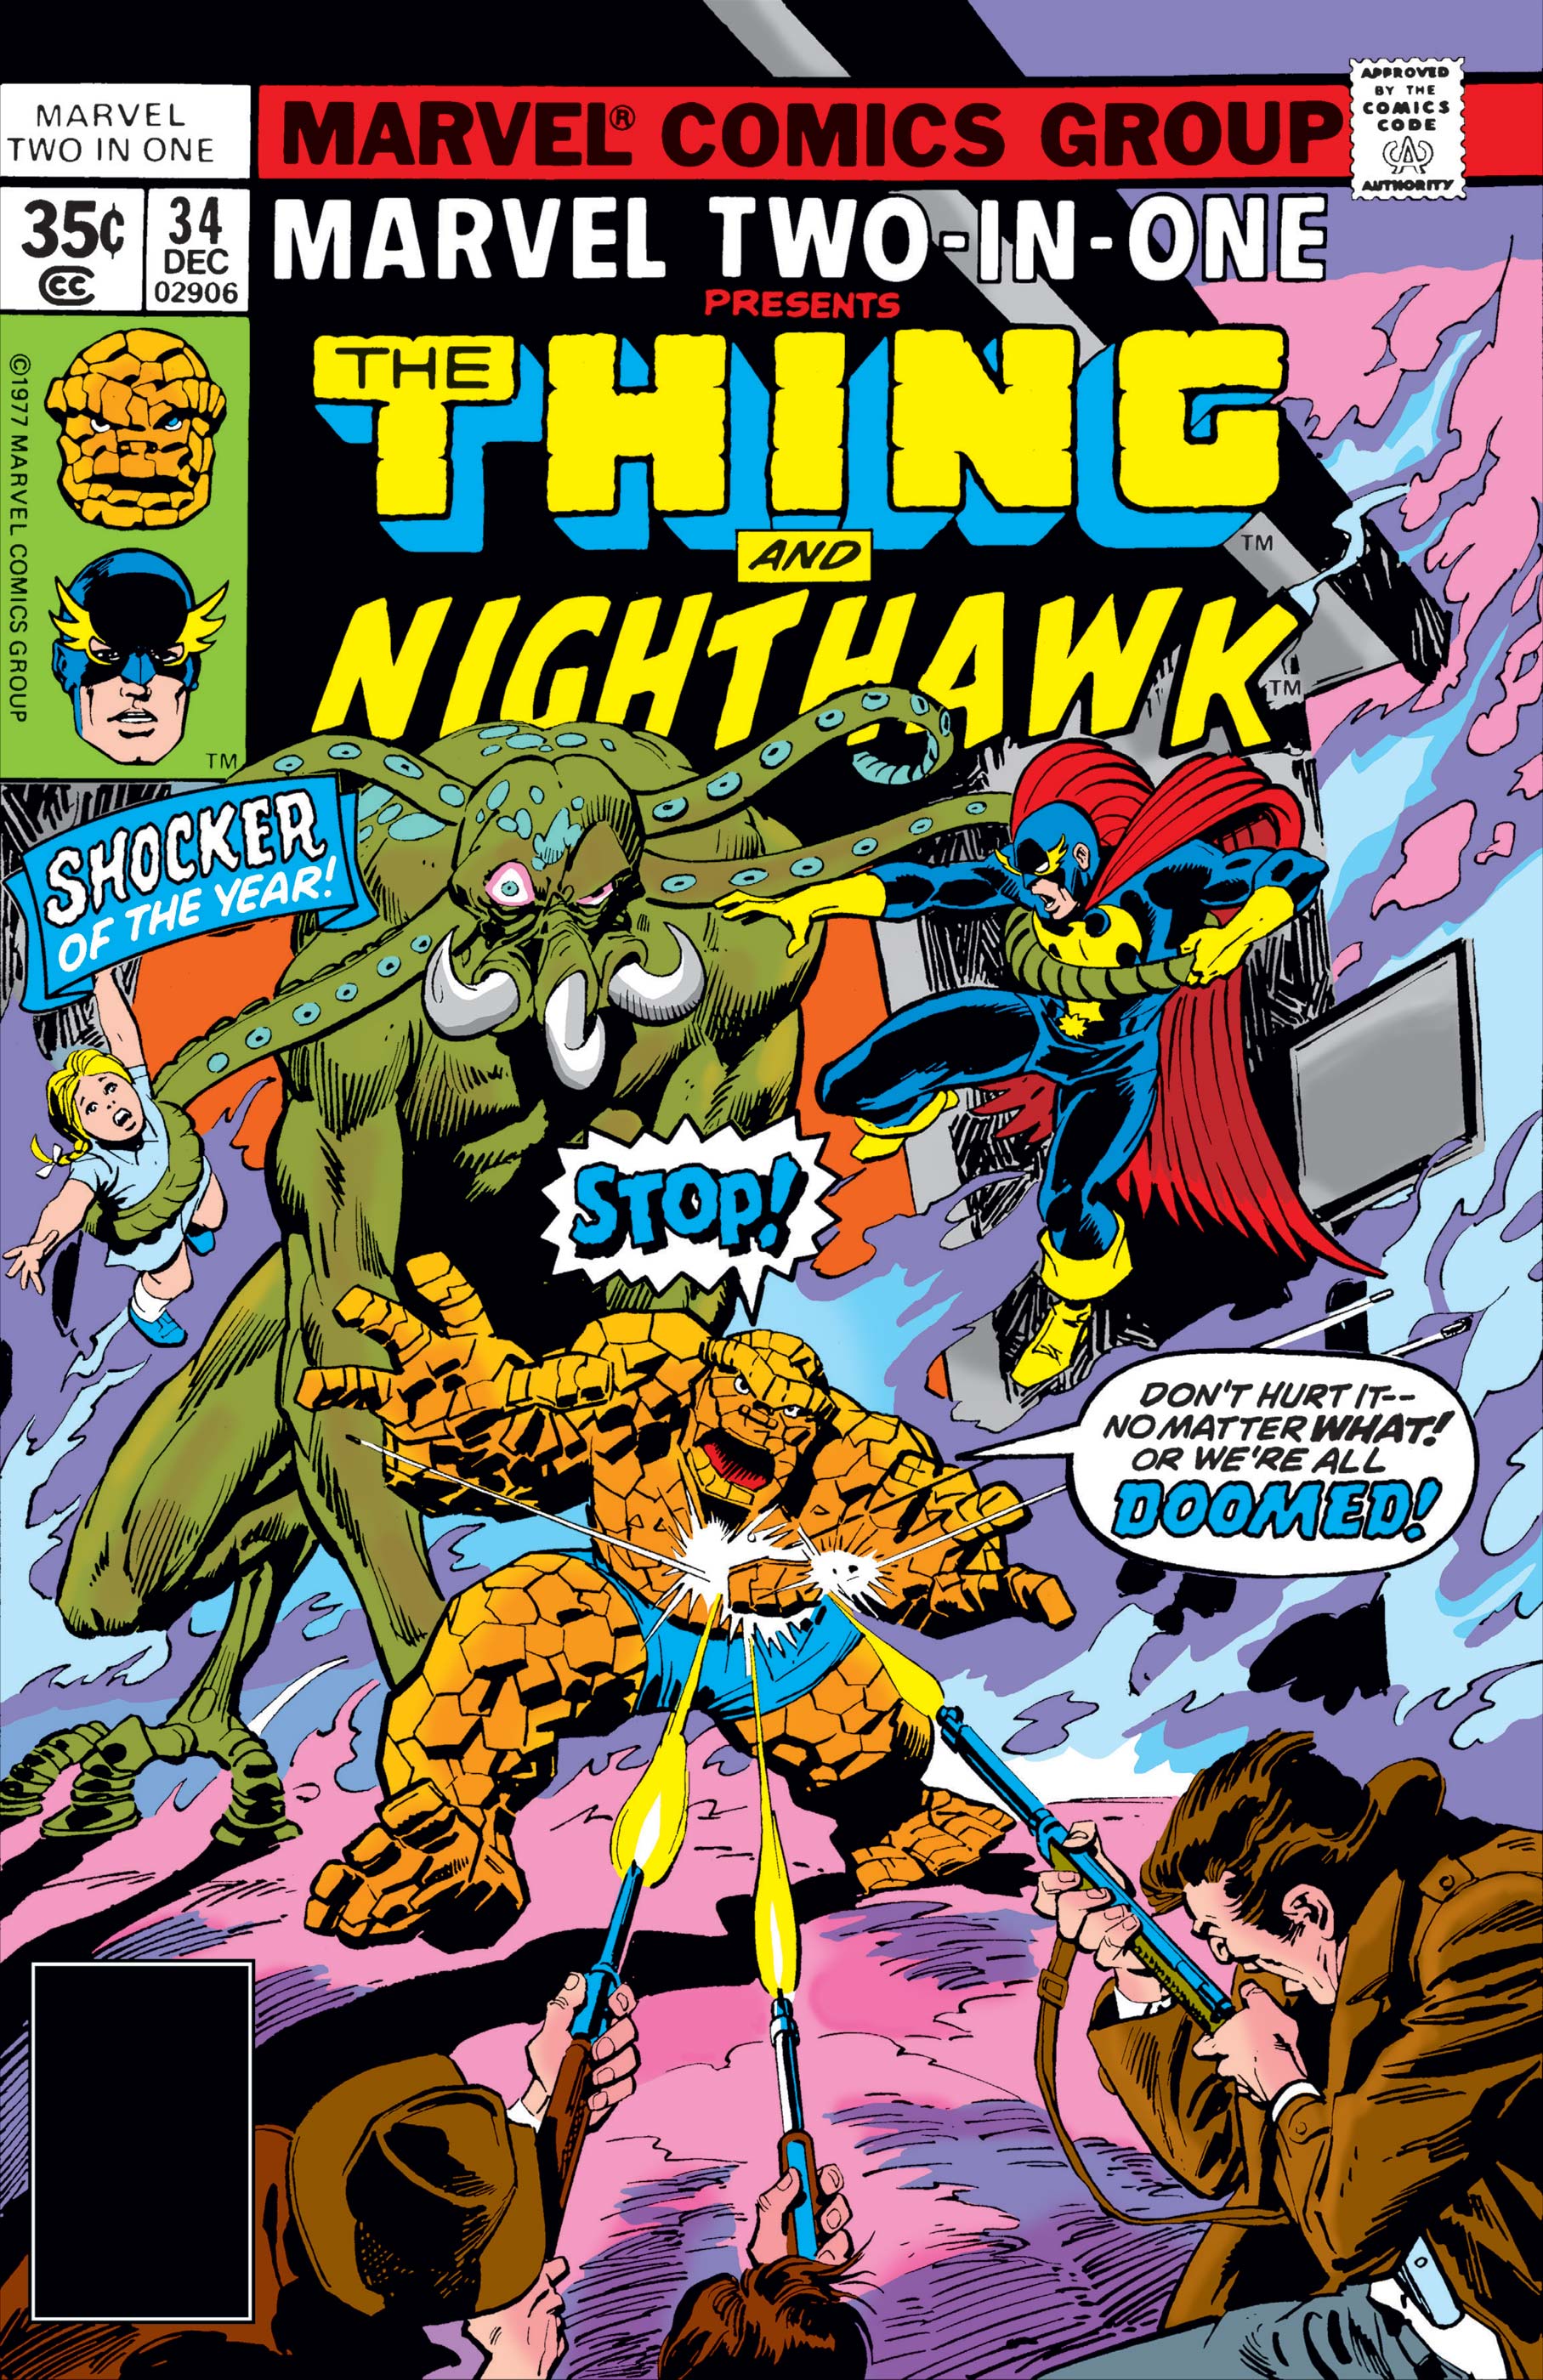 Marvel Two-in-One (1974) #34